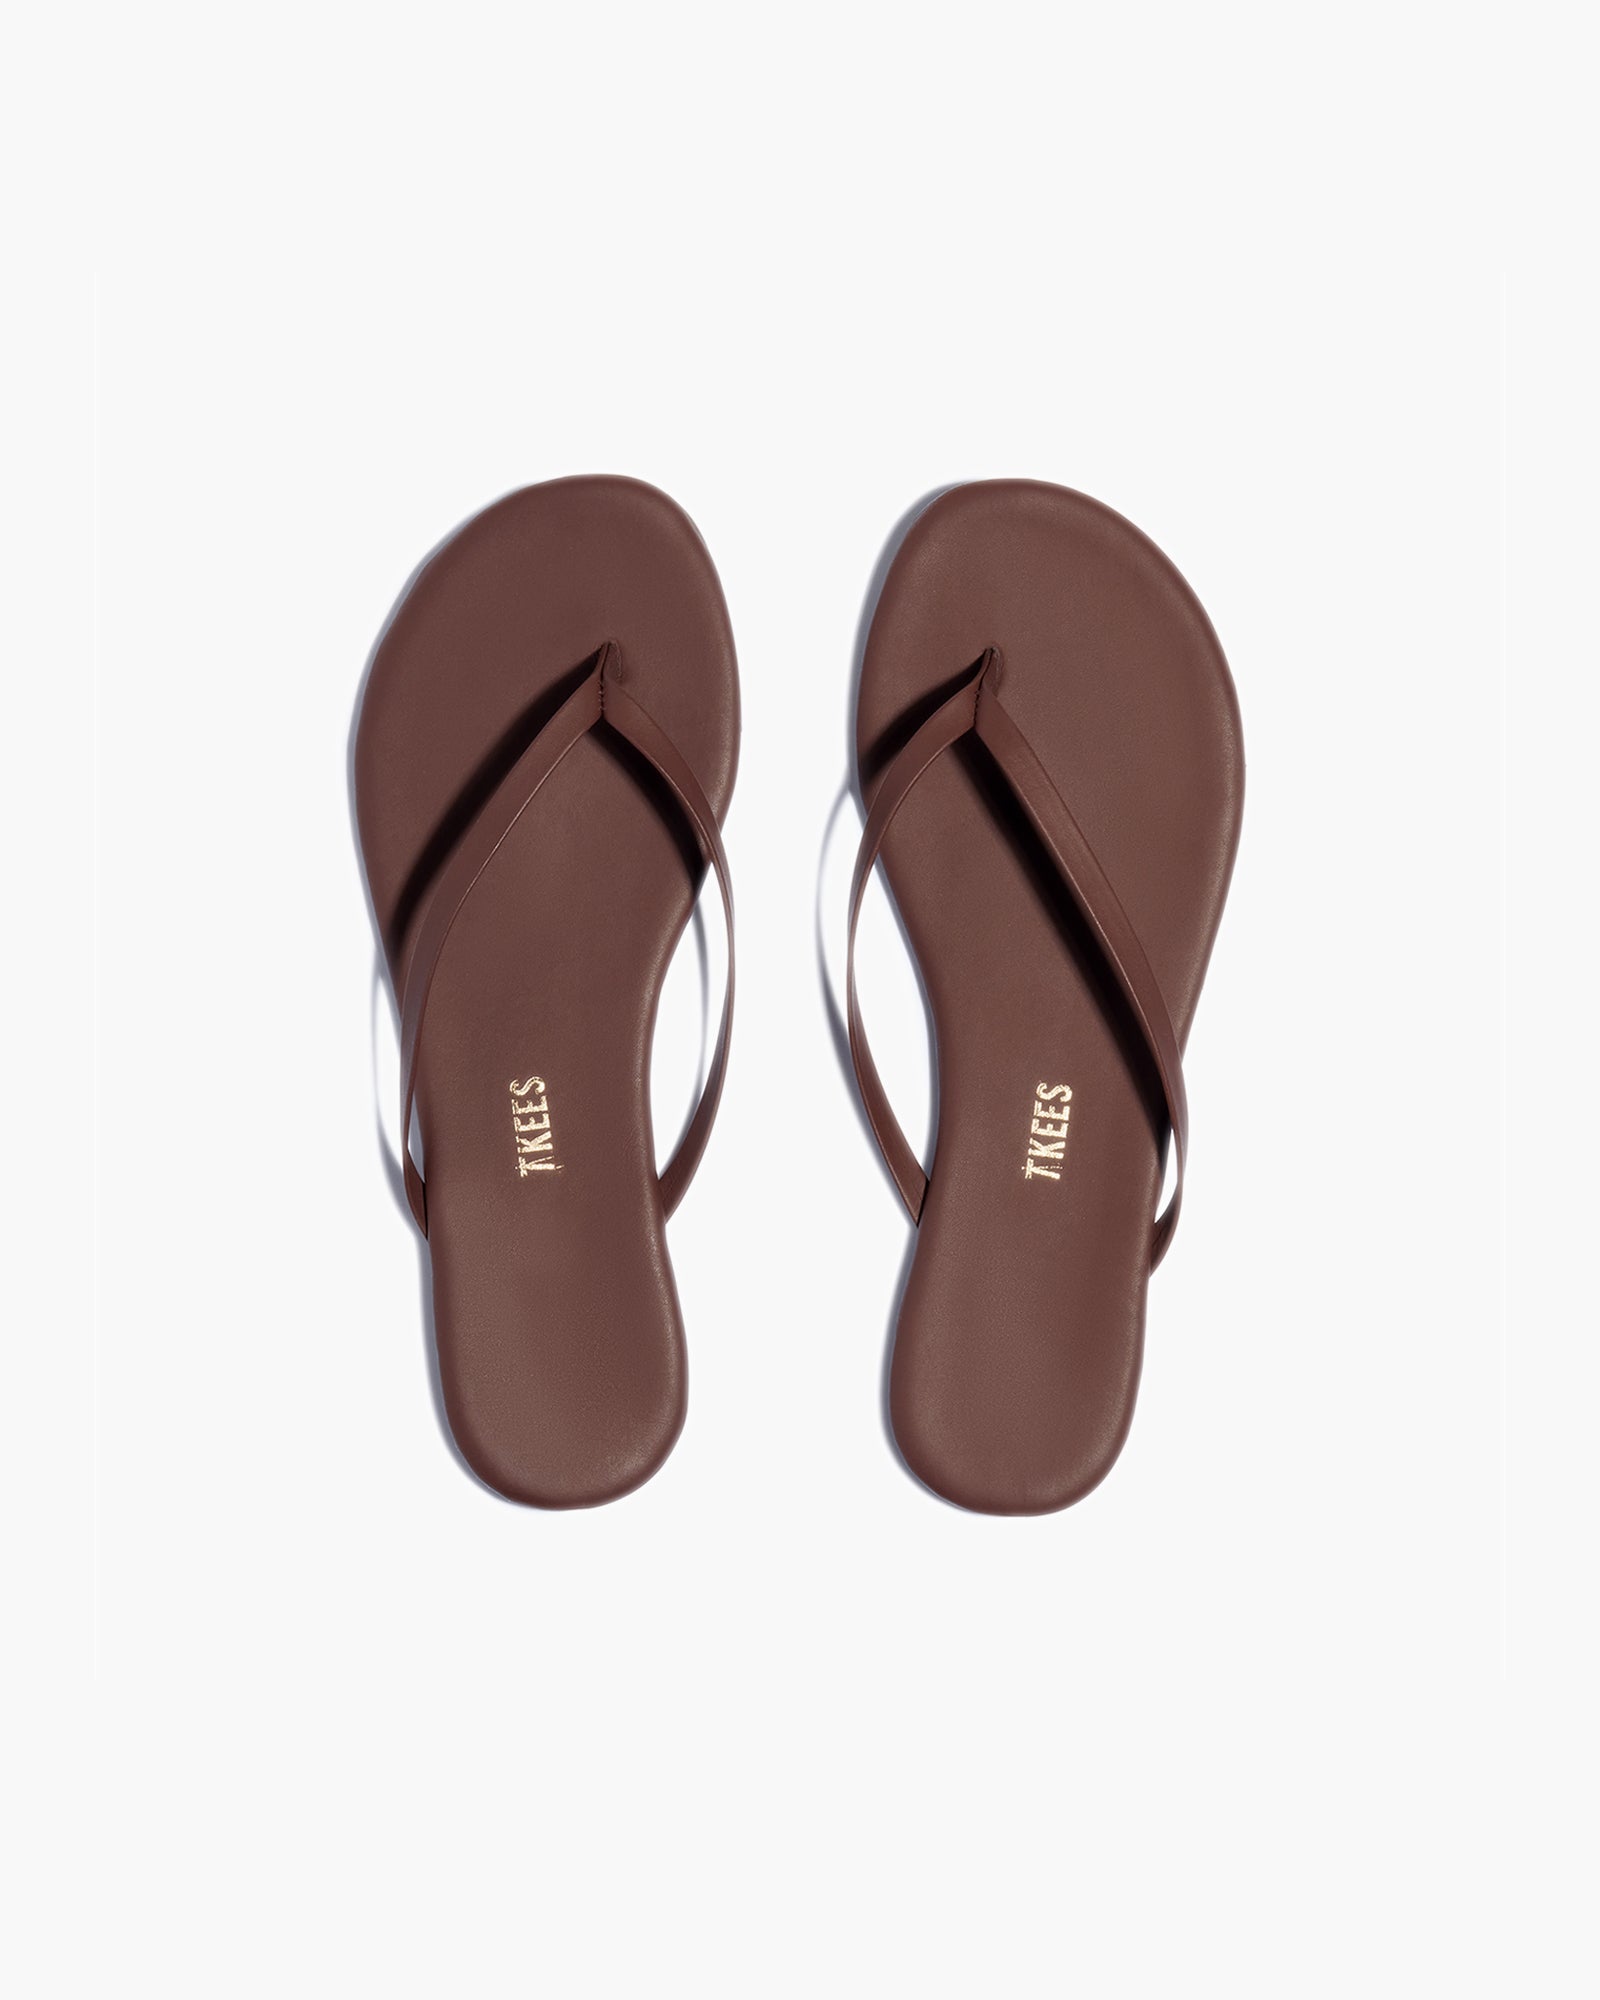 Brown Women's's's's's's's's's's's's's's's's's's's's's's TKEES Lily Nudes Flip Flops | DFZCWP709